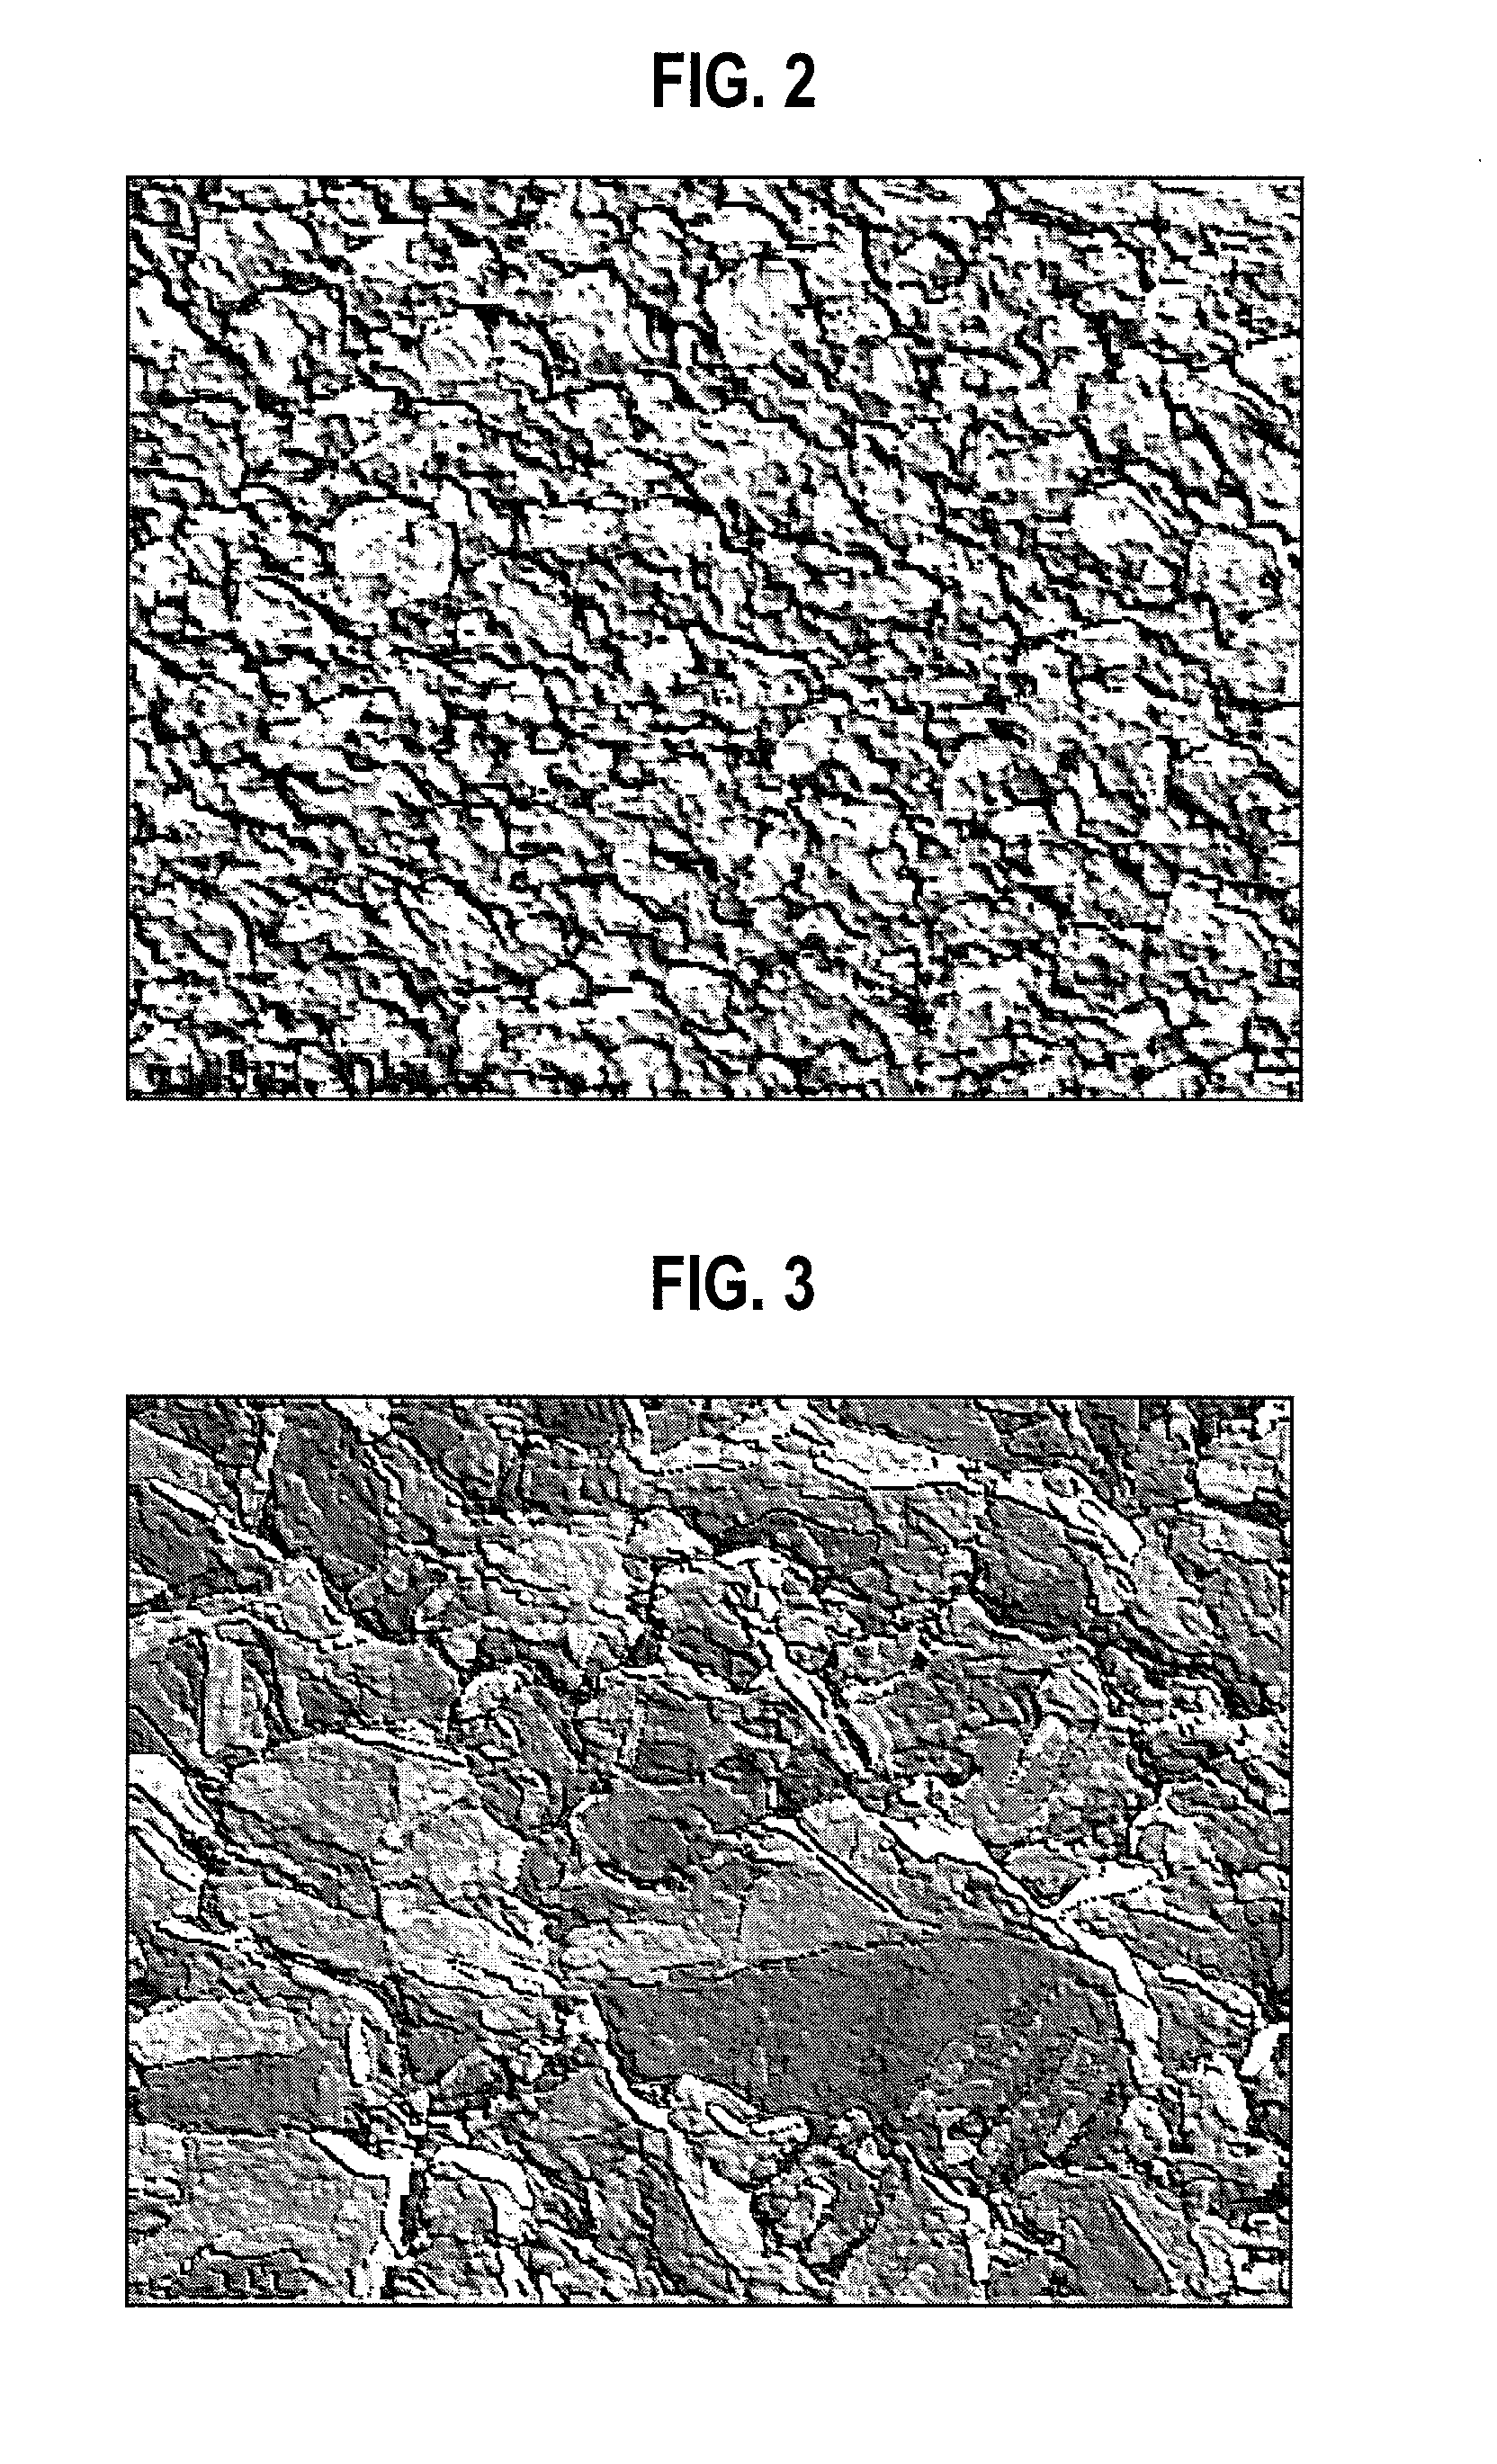 Silver layer formed by electrosilvering substrate material